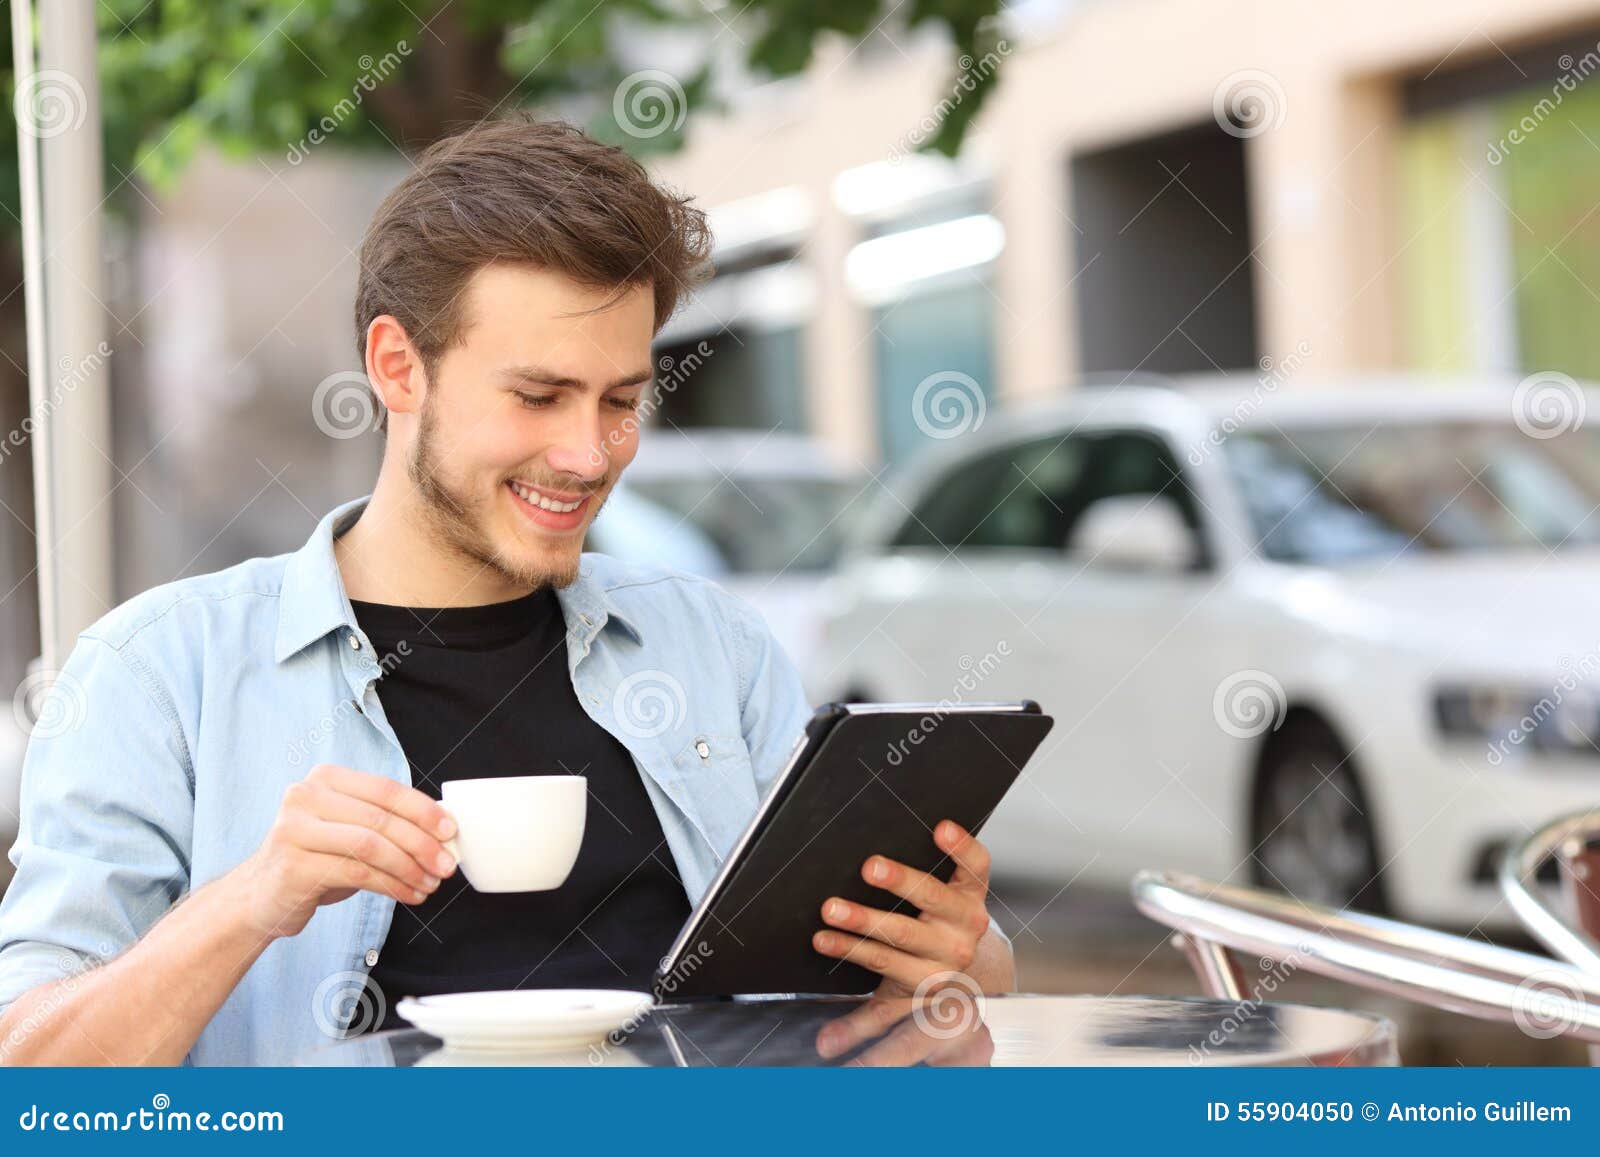 man reading an ebook or tablet in a coffee shop